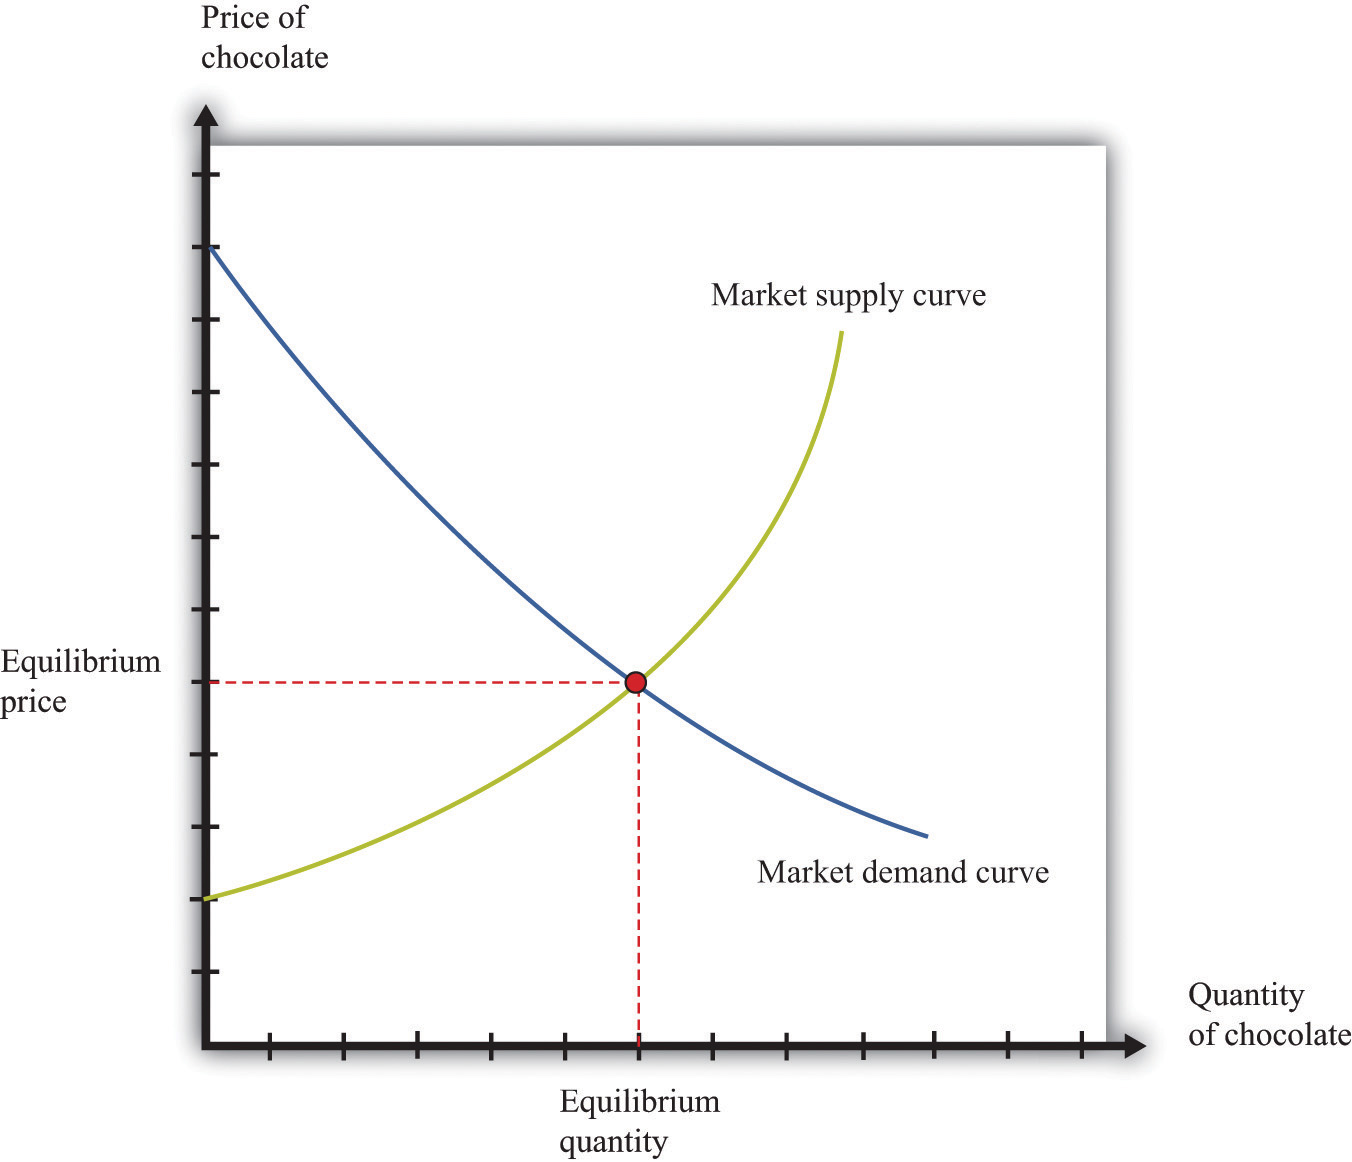 when firms exit a perfectly competitive industry, the market supply curve shifts to the left